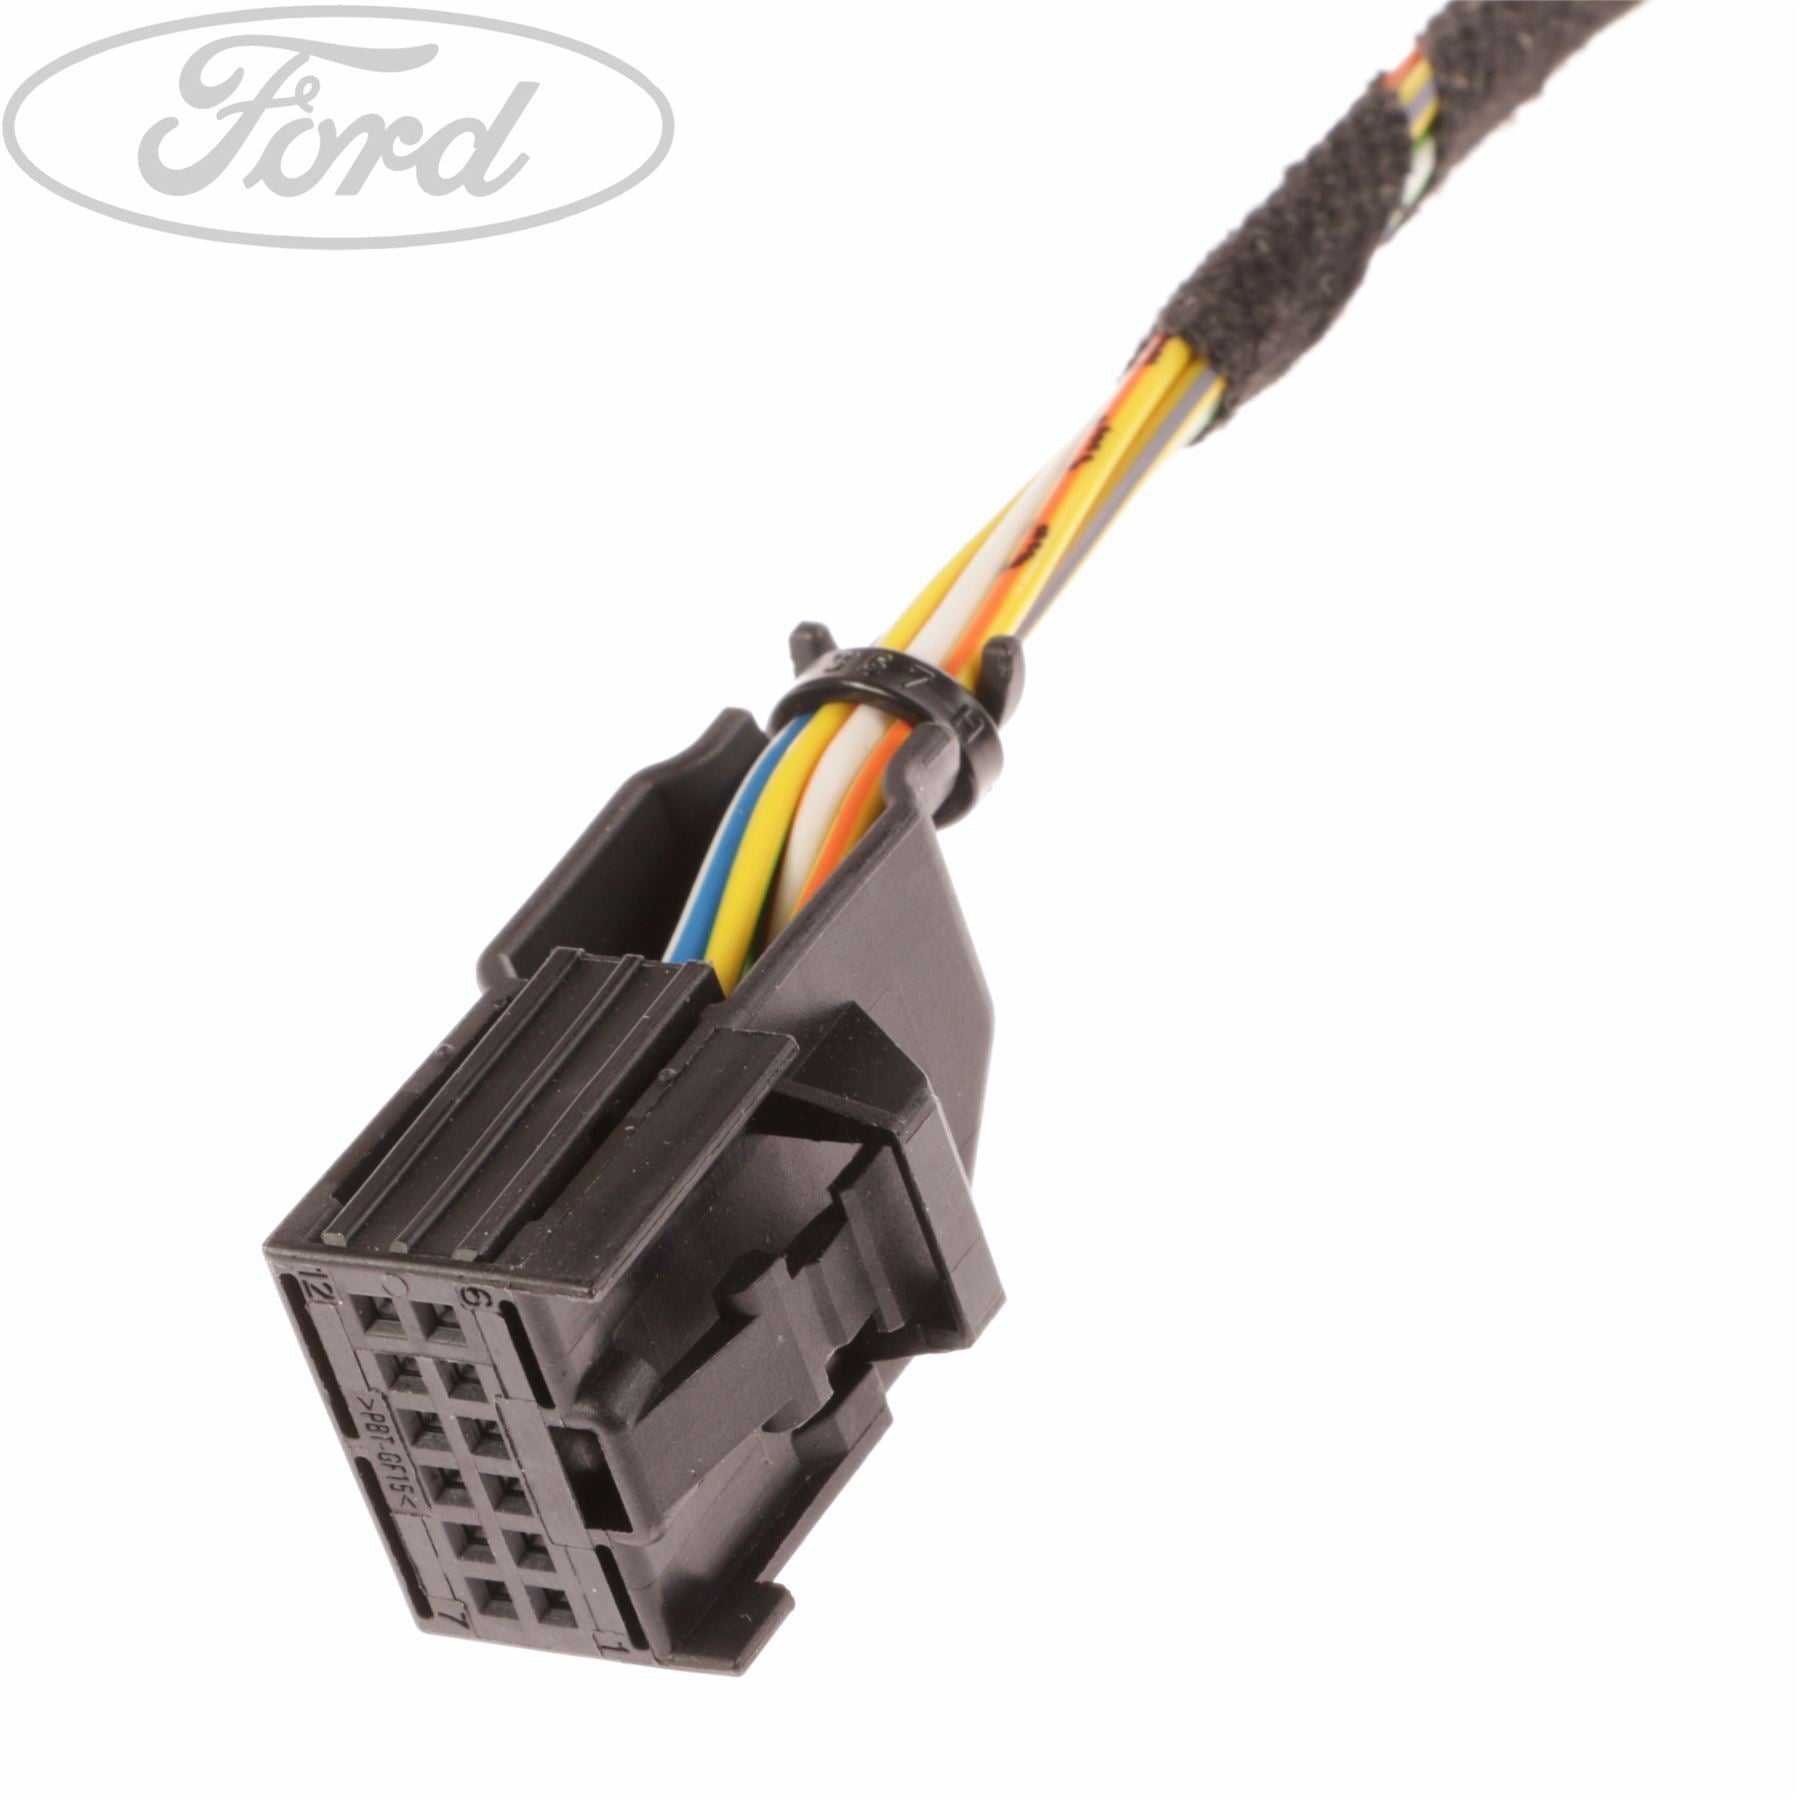 Ford, WIRES